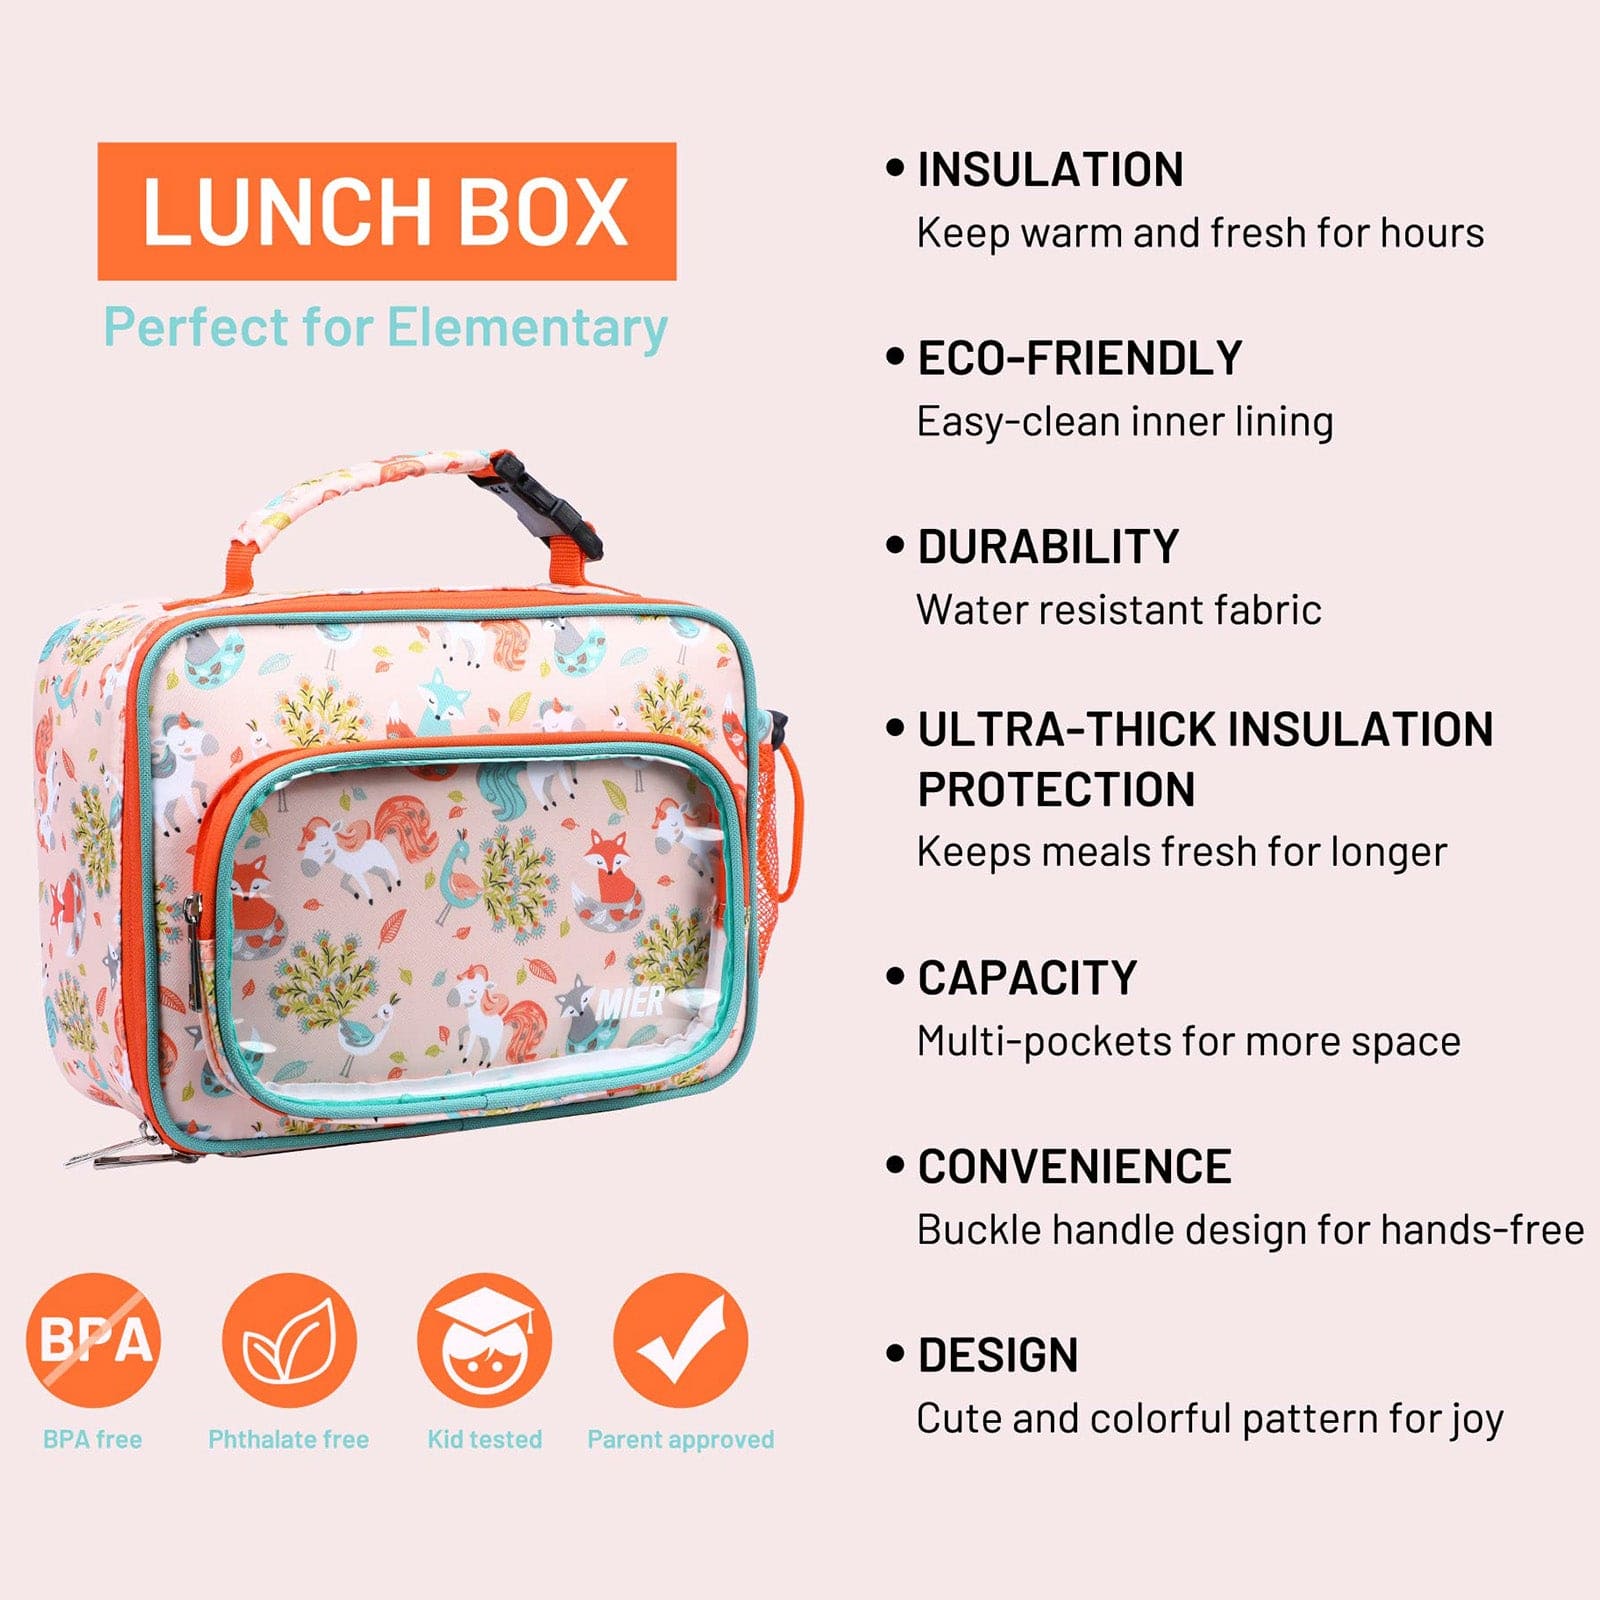 MIER Lunch Bags for Kids Cute Insulated Lunch Box Tote, Blue Orange Cat